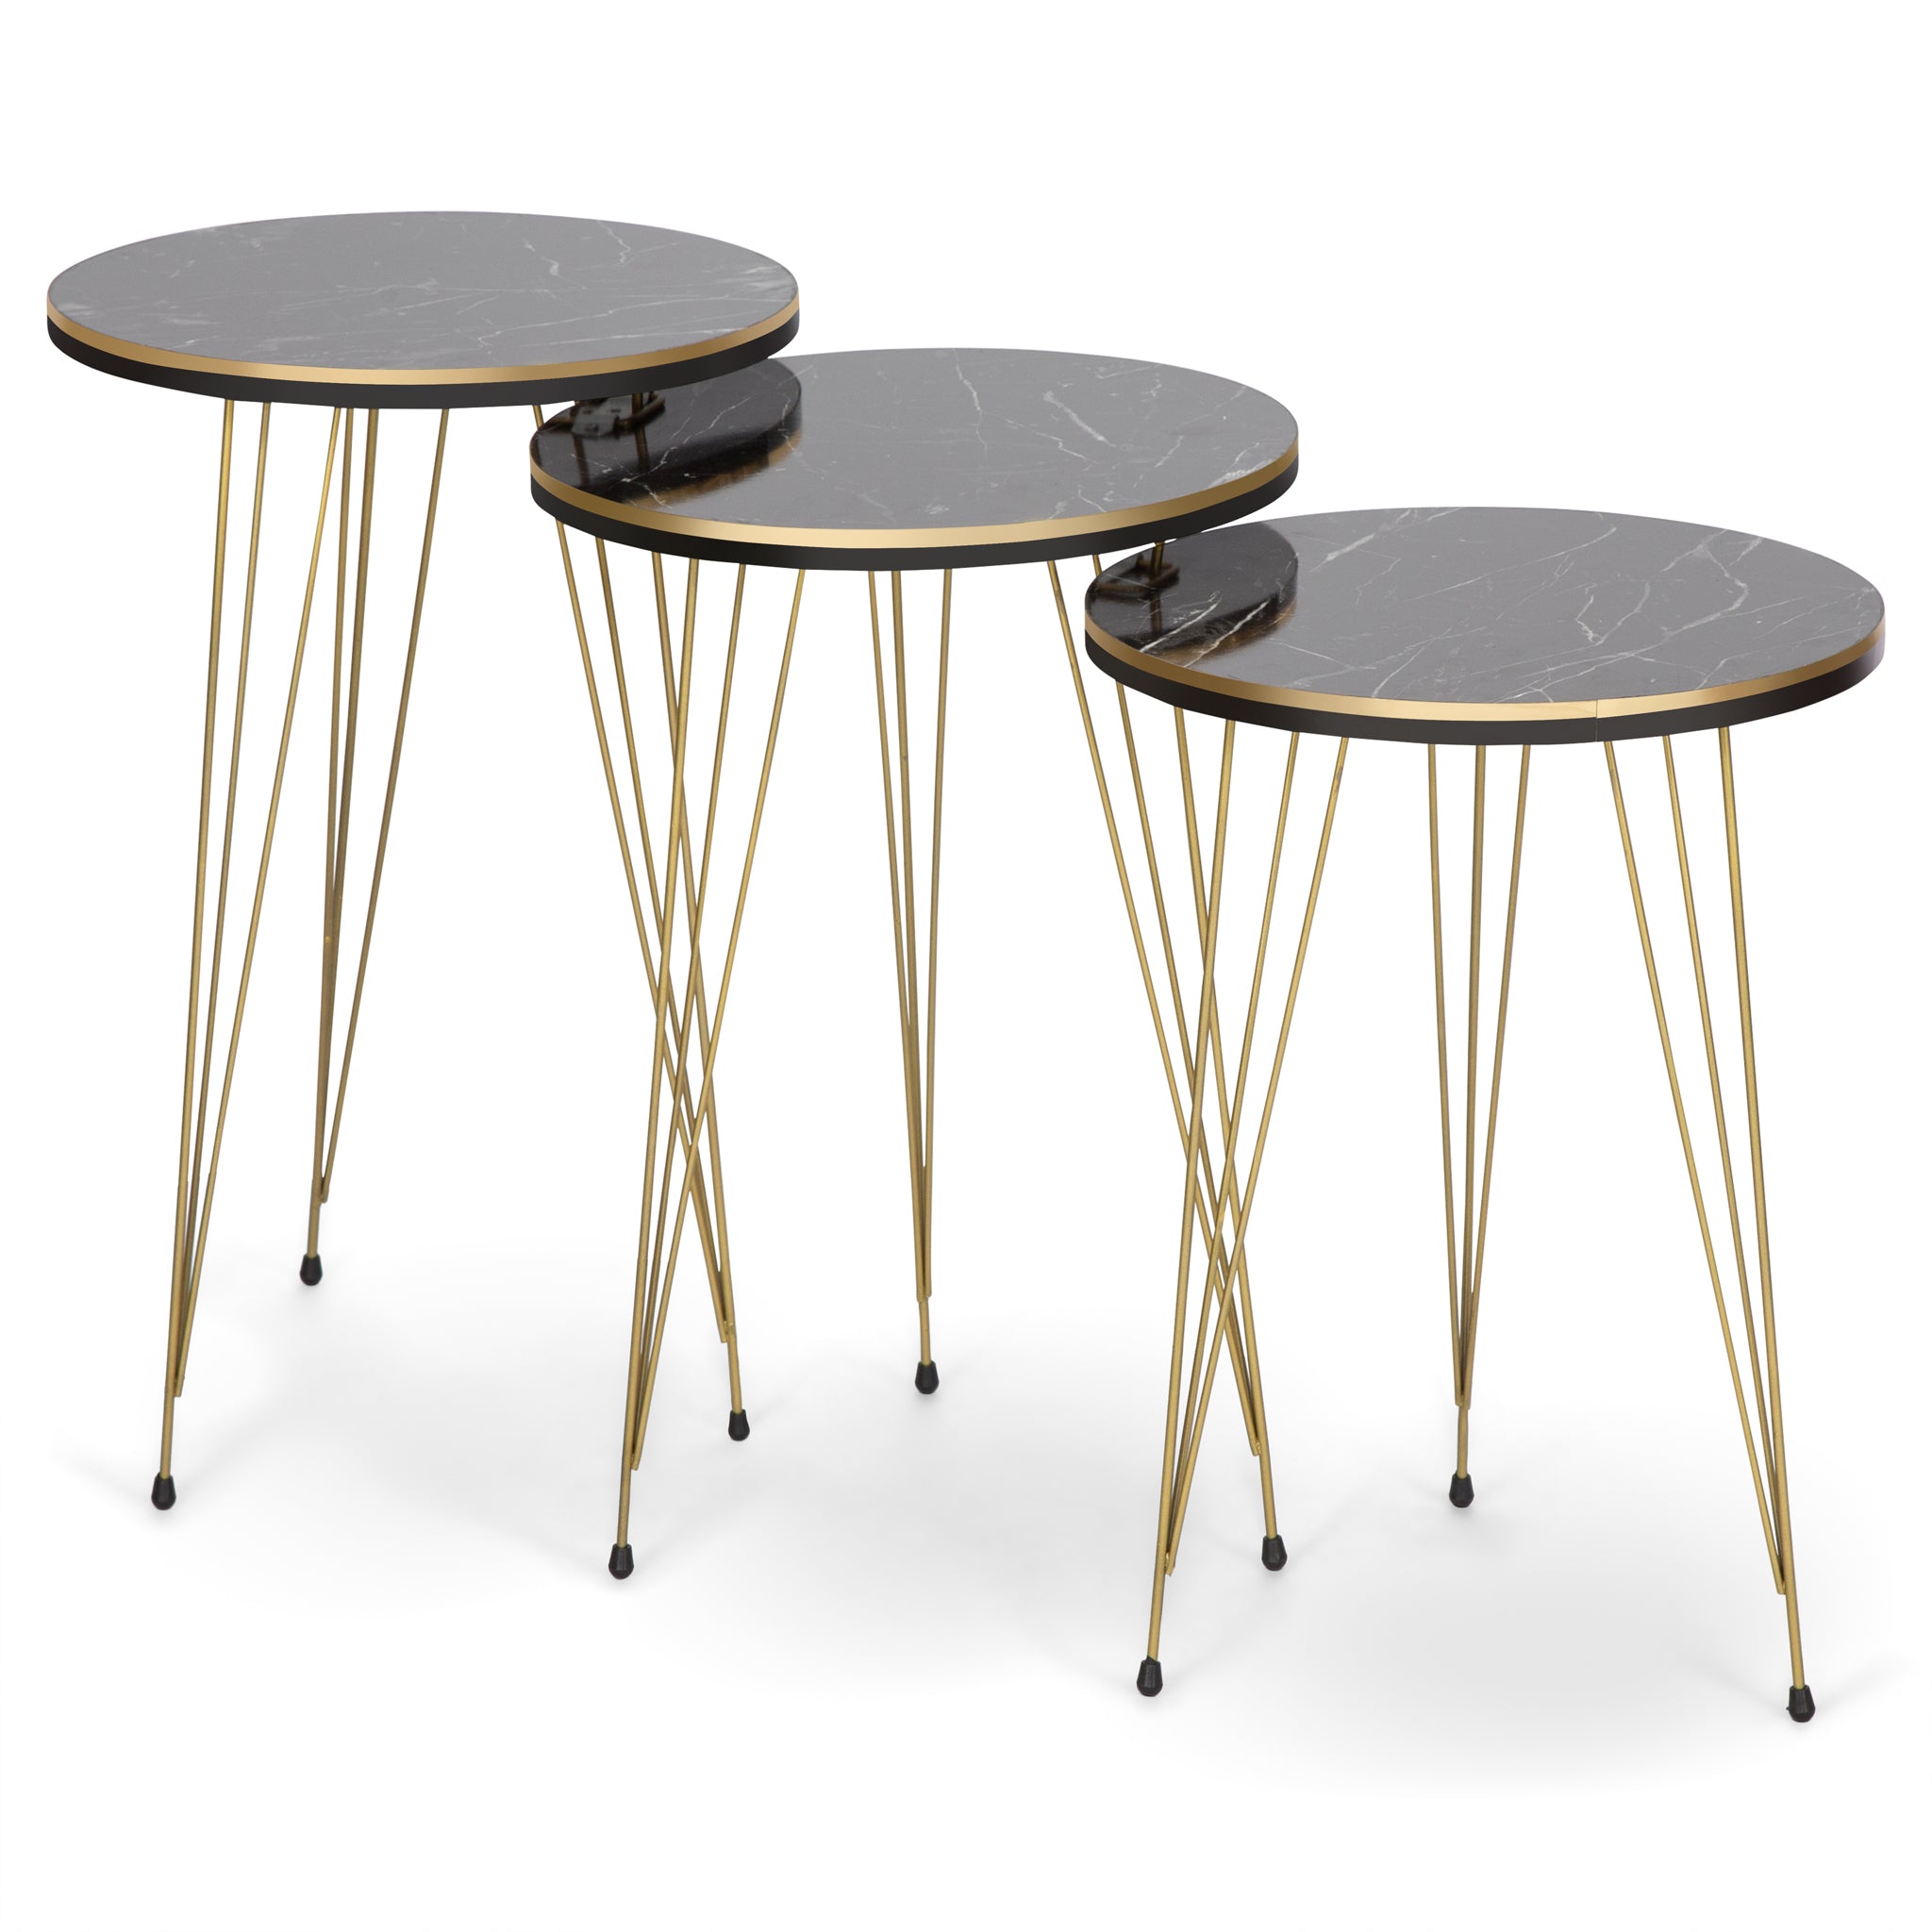 Ellipse Coffee Table & Set of 3 Side tables - Gold & Black Marble